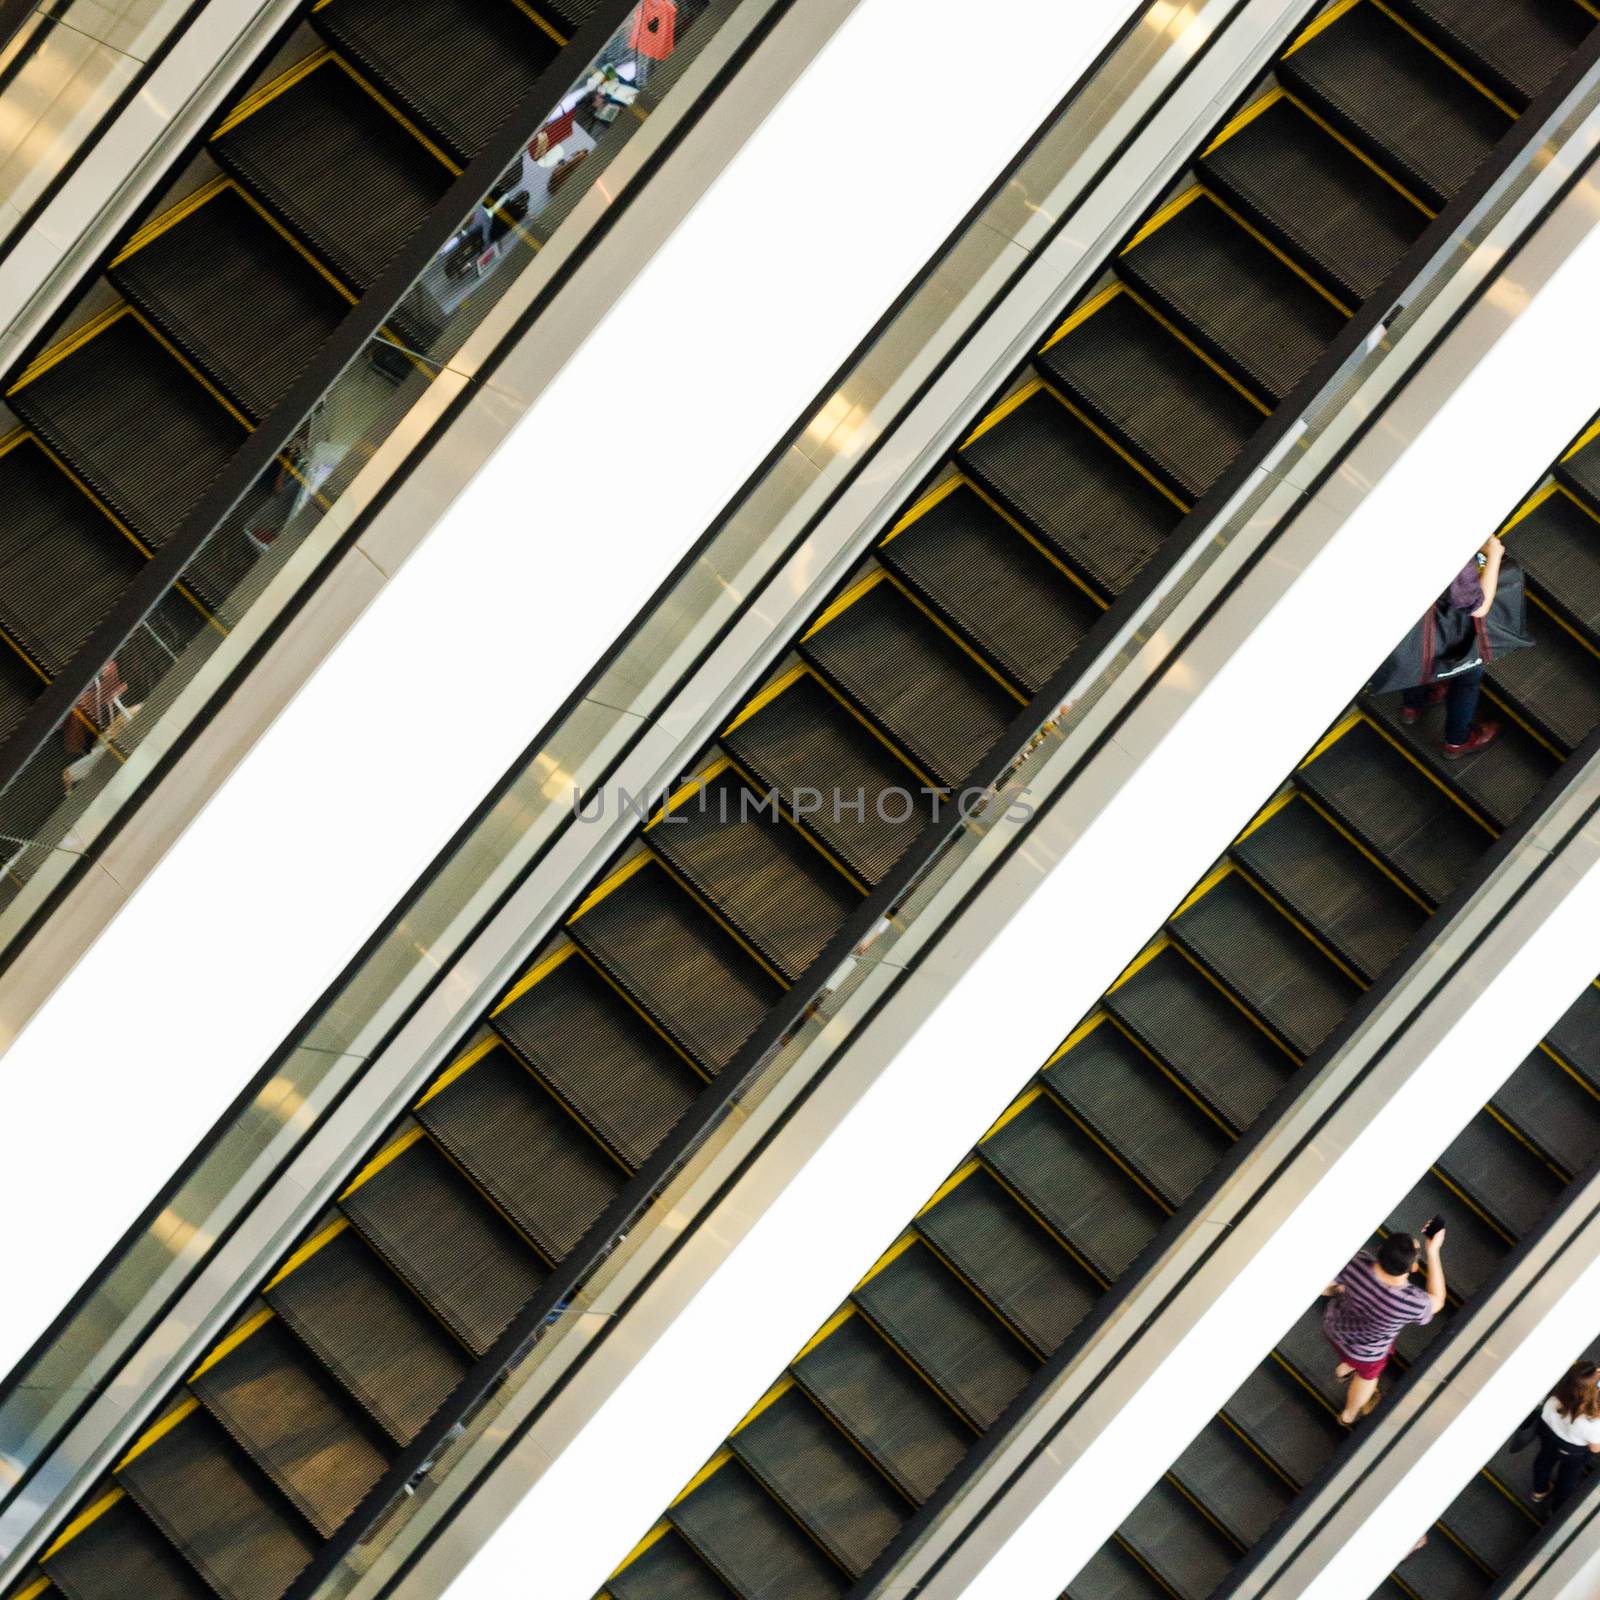 People on escalators at the modern shopping mall. 